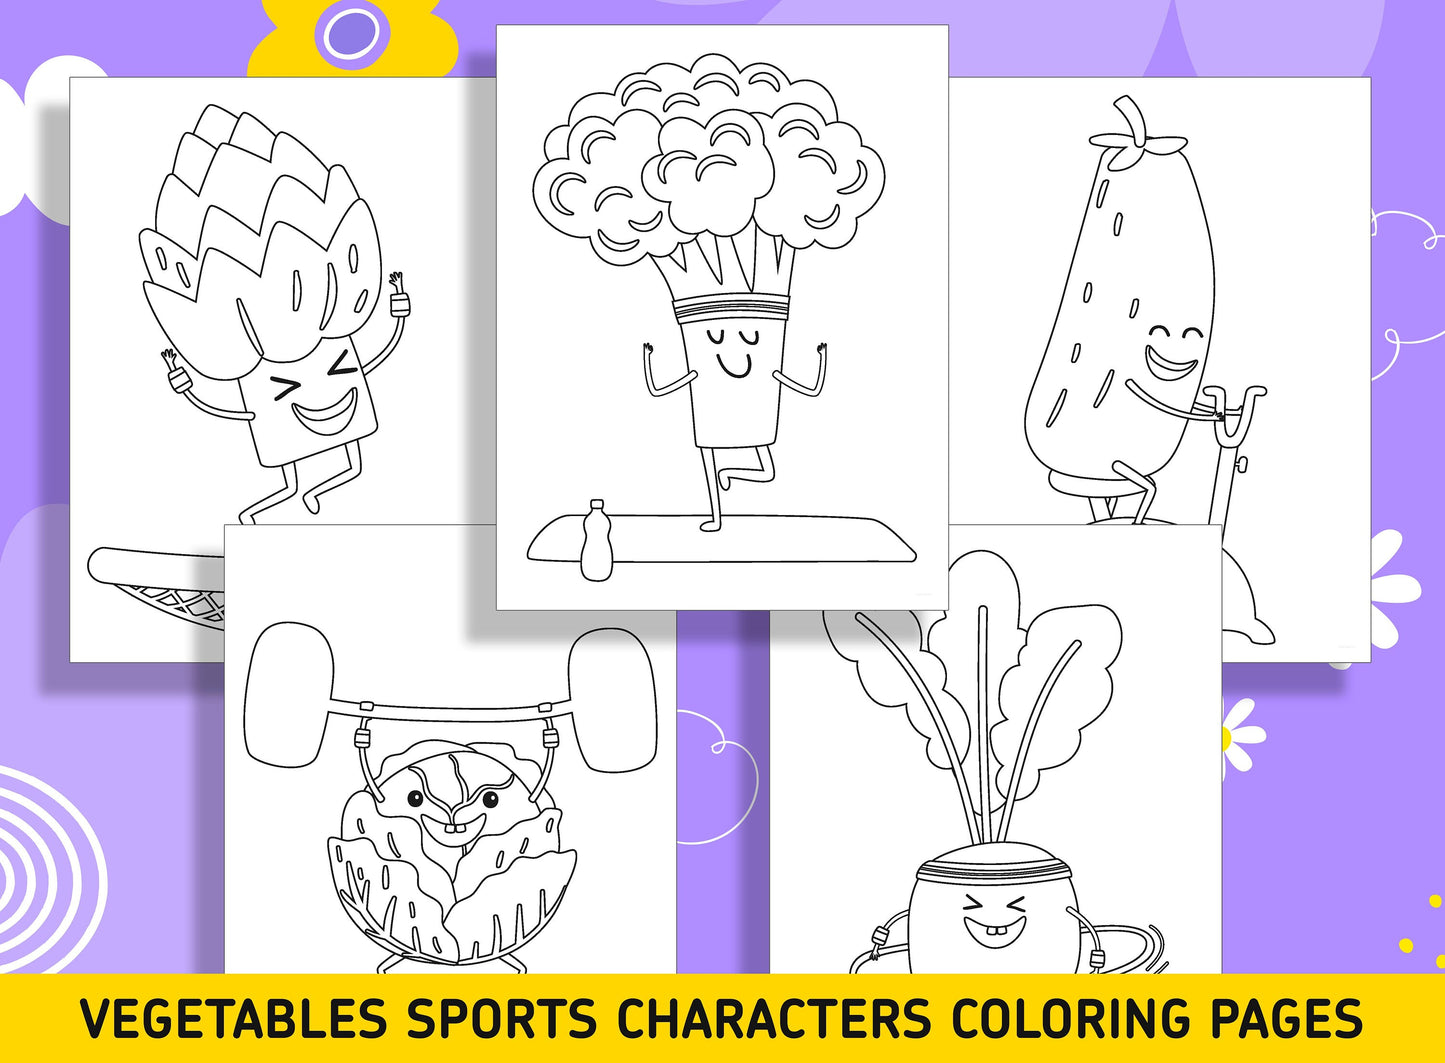 15 Vegetables Sports Characters Coloring Pages, Perfect for Preschool and Kindergarten, PDF File, Instant Download